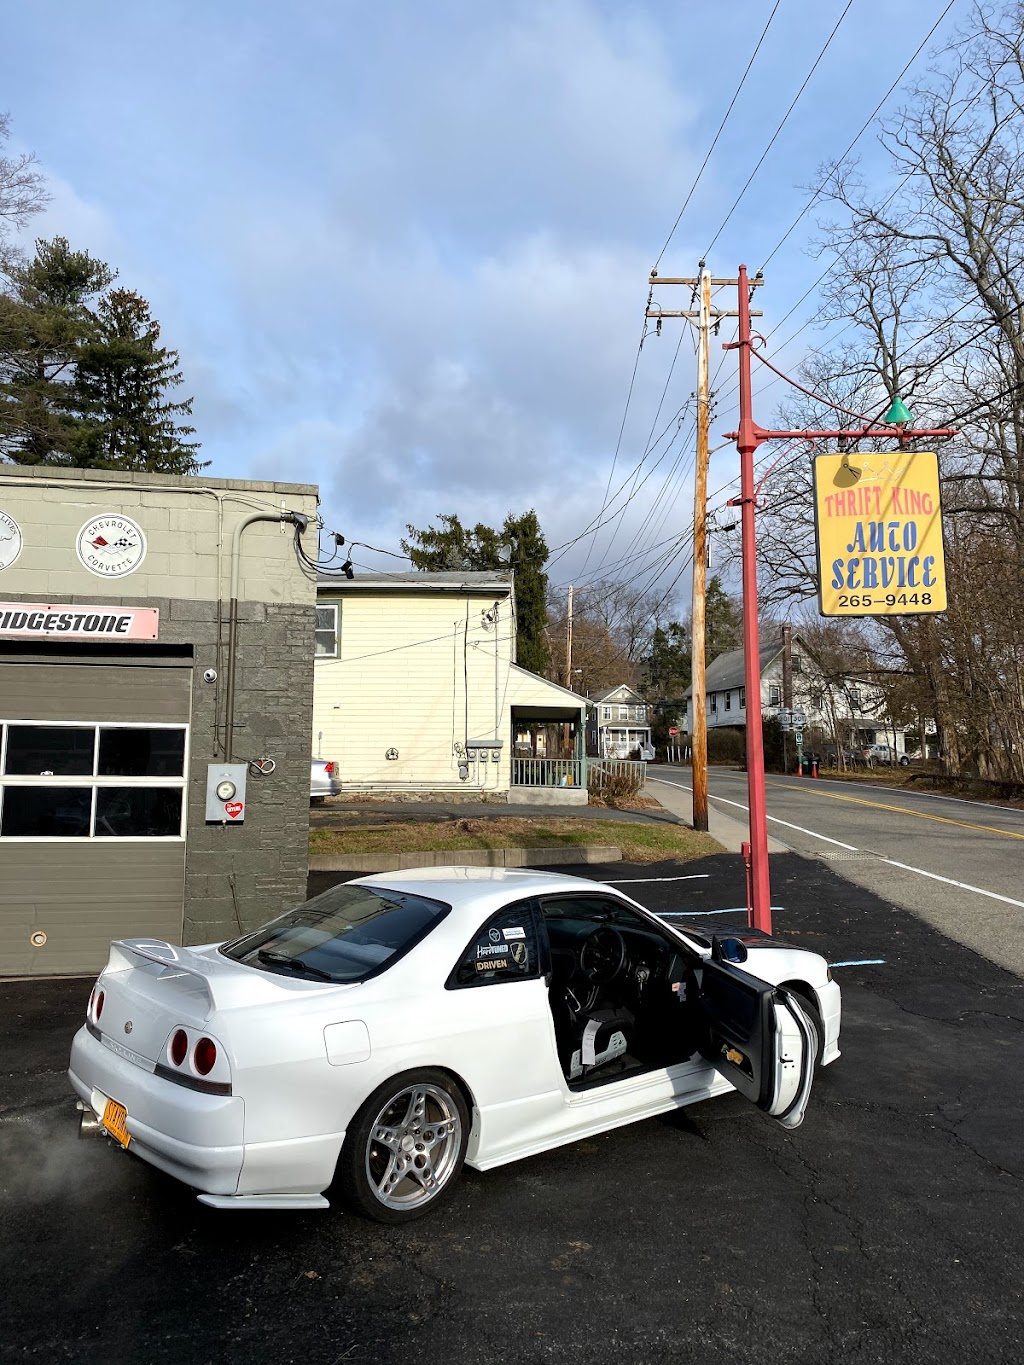 Thrift King Auto Services | 7 Peekskill Rd, Cold Spring, NY 10516 | Phone: (845) 265-9448